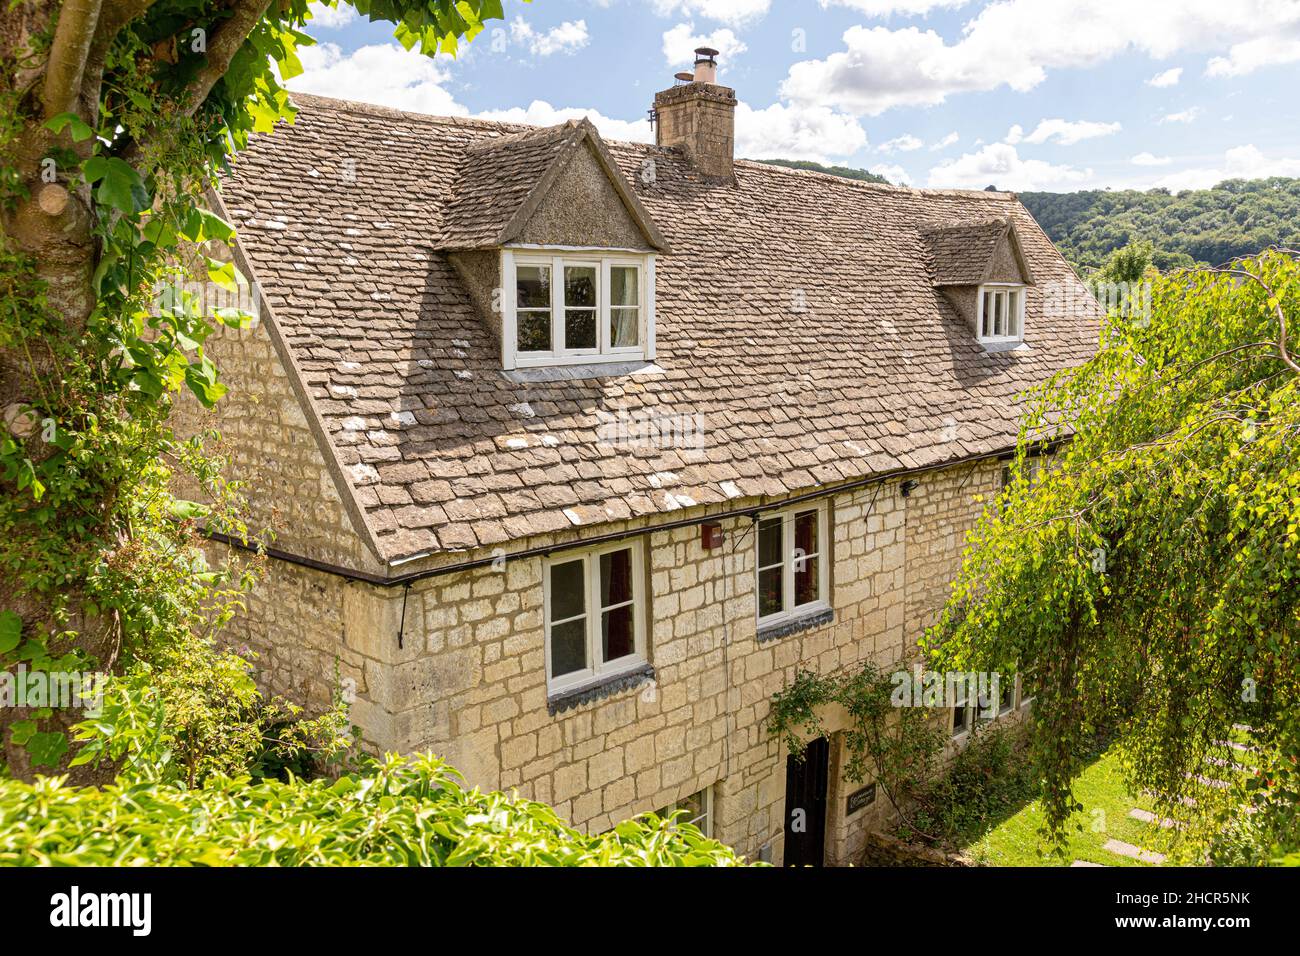 'Recreation Cottage' a traditional 18th C stone building with a stone tiled roof and dormer windows in the Cotswold village of Slad, Gloucestershire. Stock Photo